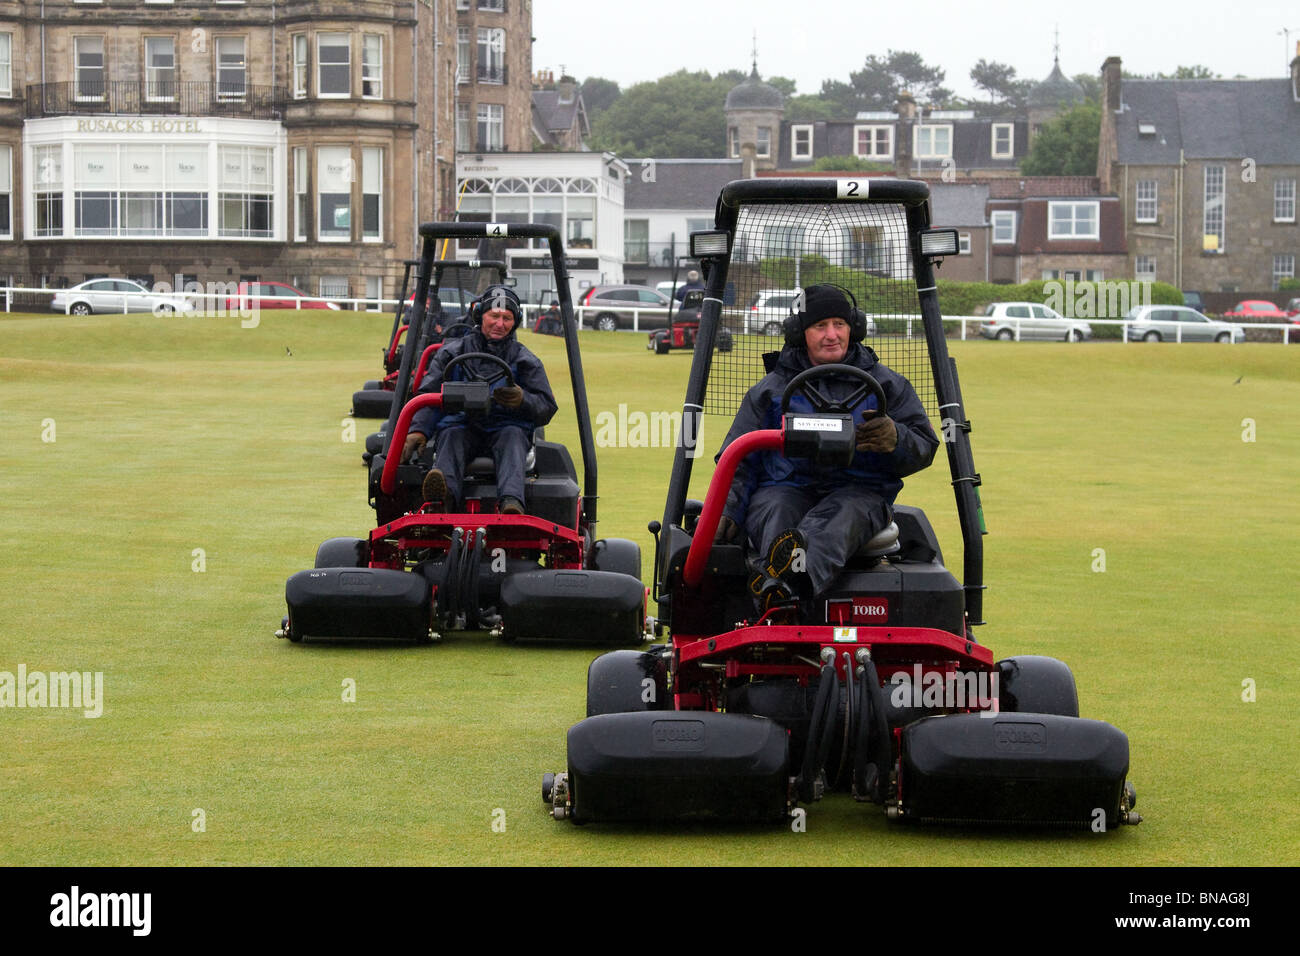 Riding Greens mowers machinery Grass cutters and Green keepers mowing the Old Course;  Team maintenance at the 139th British Open Golf 2010, July 15-18, St Andrews, Scotland, UK. The  function of mowing is to prepare the golf course for play although mowing patterns are often used to highlight  features of a golf course. The mowing pattern can have a big impact on the appearance of the golf course and the health of the turf while affecting your labor and fuel consumption line items. The most common fairway mowing methods are striping, contour mowing, the classic cut, and pushing and pulling. Stock Photo